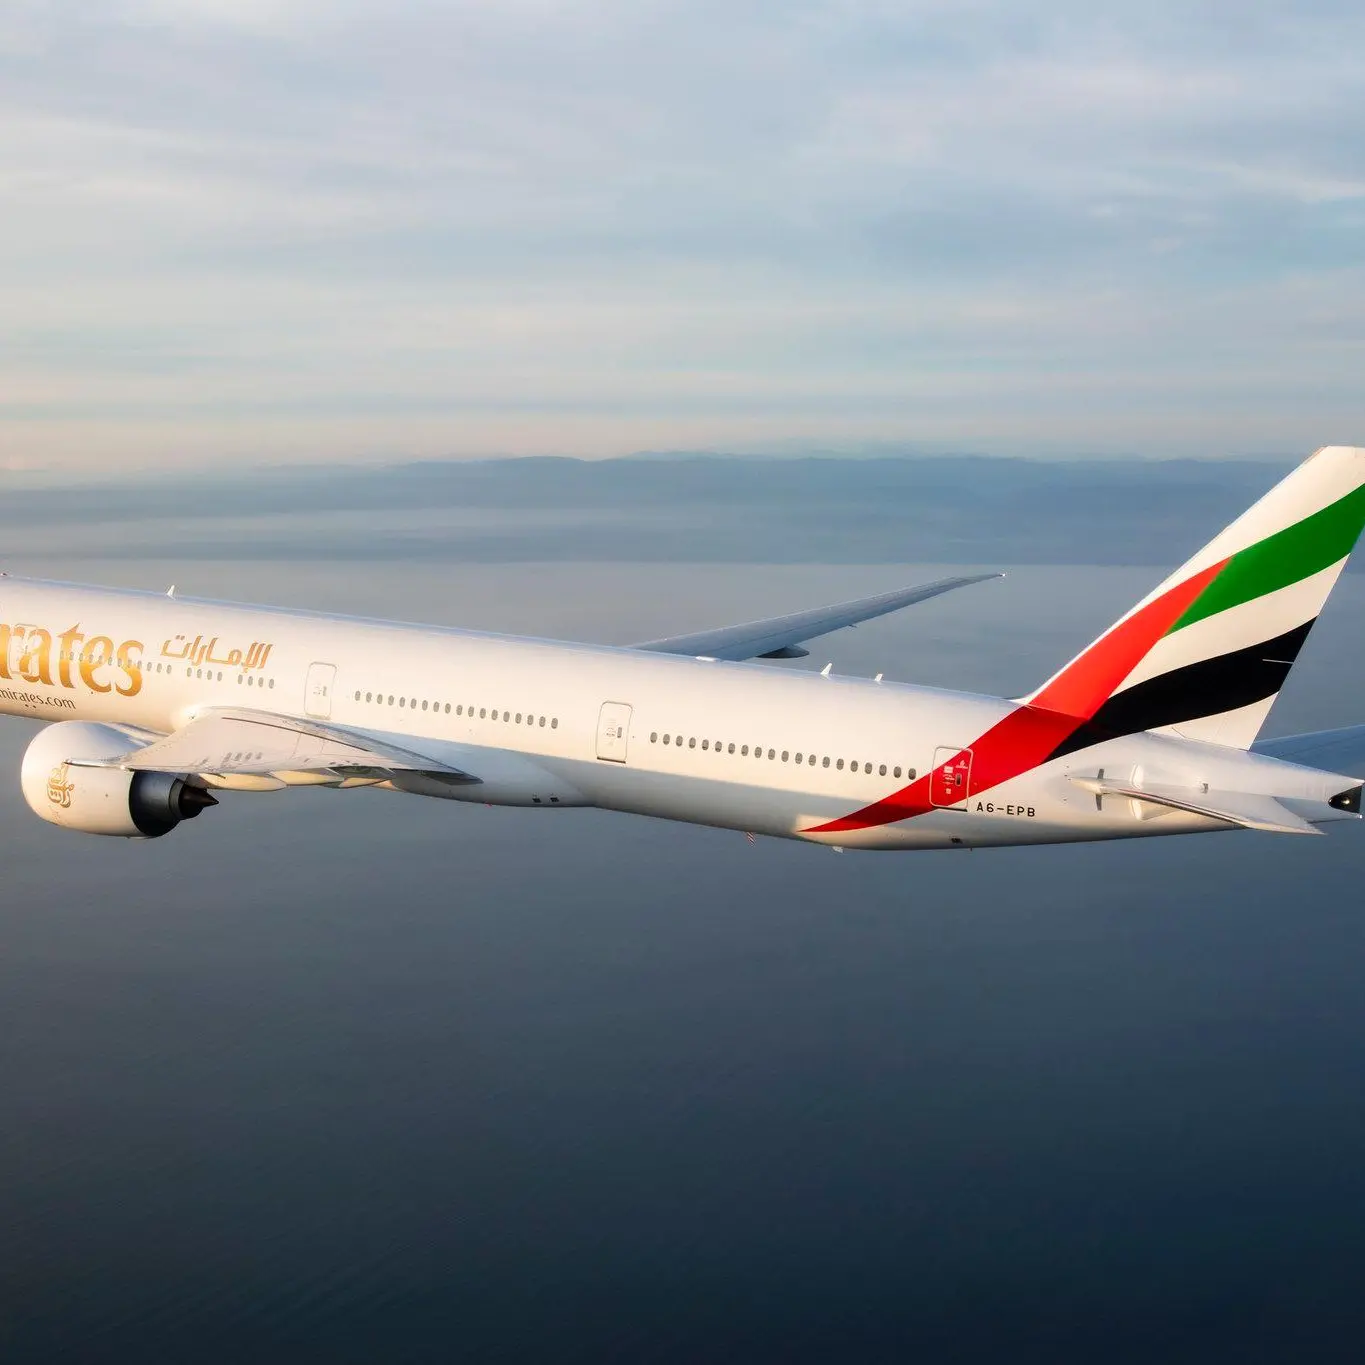 UAE carrier Emirates announces key appointments across commercial teams